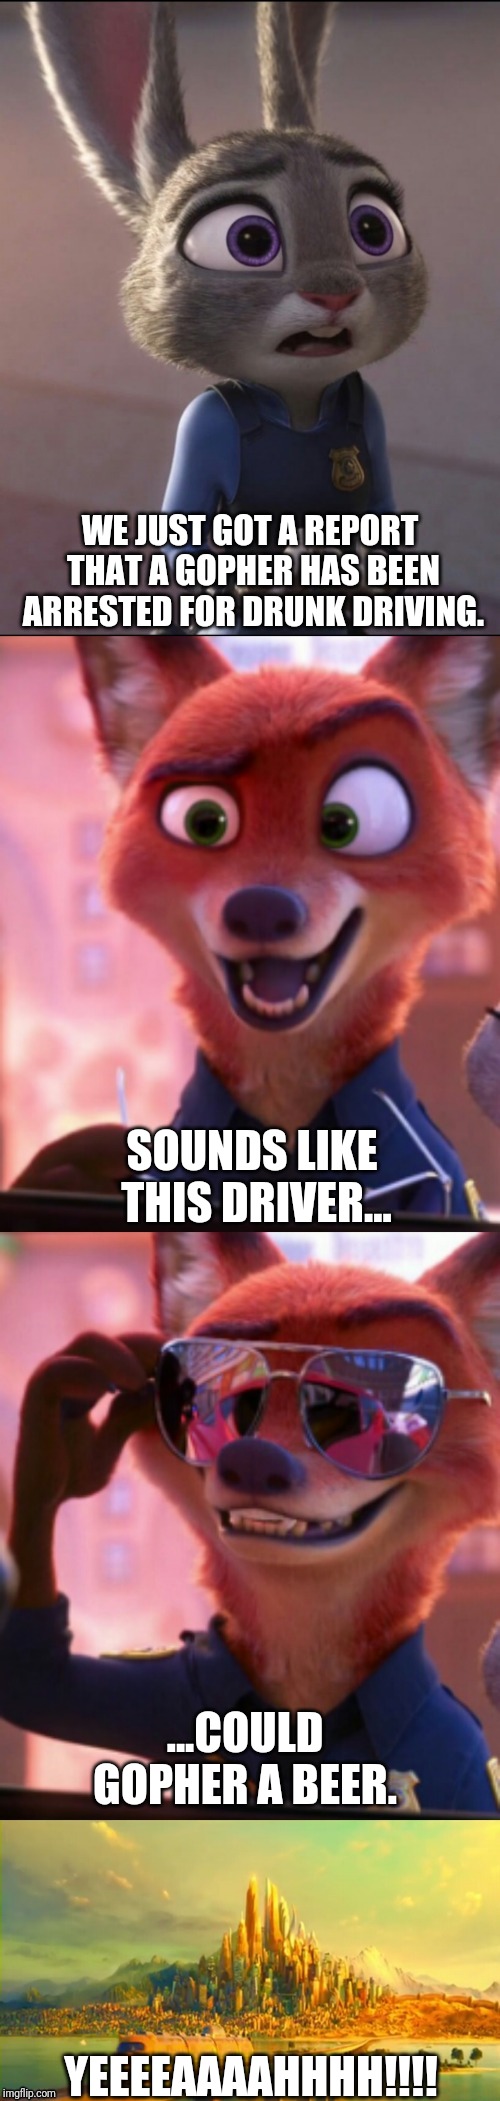 CSI: Zootopia 16 | WE JUST GOT A REPORT THAT A GOPHER HAS BEEN ARRESTED FOR DRUNK DRIVING. SOUNDS LIKE THIS DRIVER... ...COULD GOPHER A BEER. YEEEEAAAAHHHH!!!! | image tagged in csi zootopia,zootopia,judy hopps,nick wilde,parody,funny | made w/ Imgflip meme maker